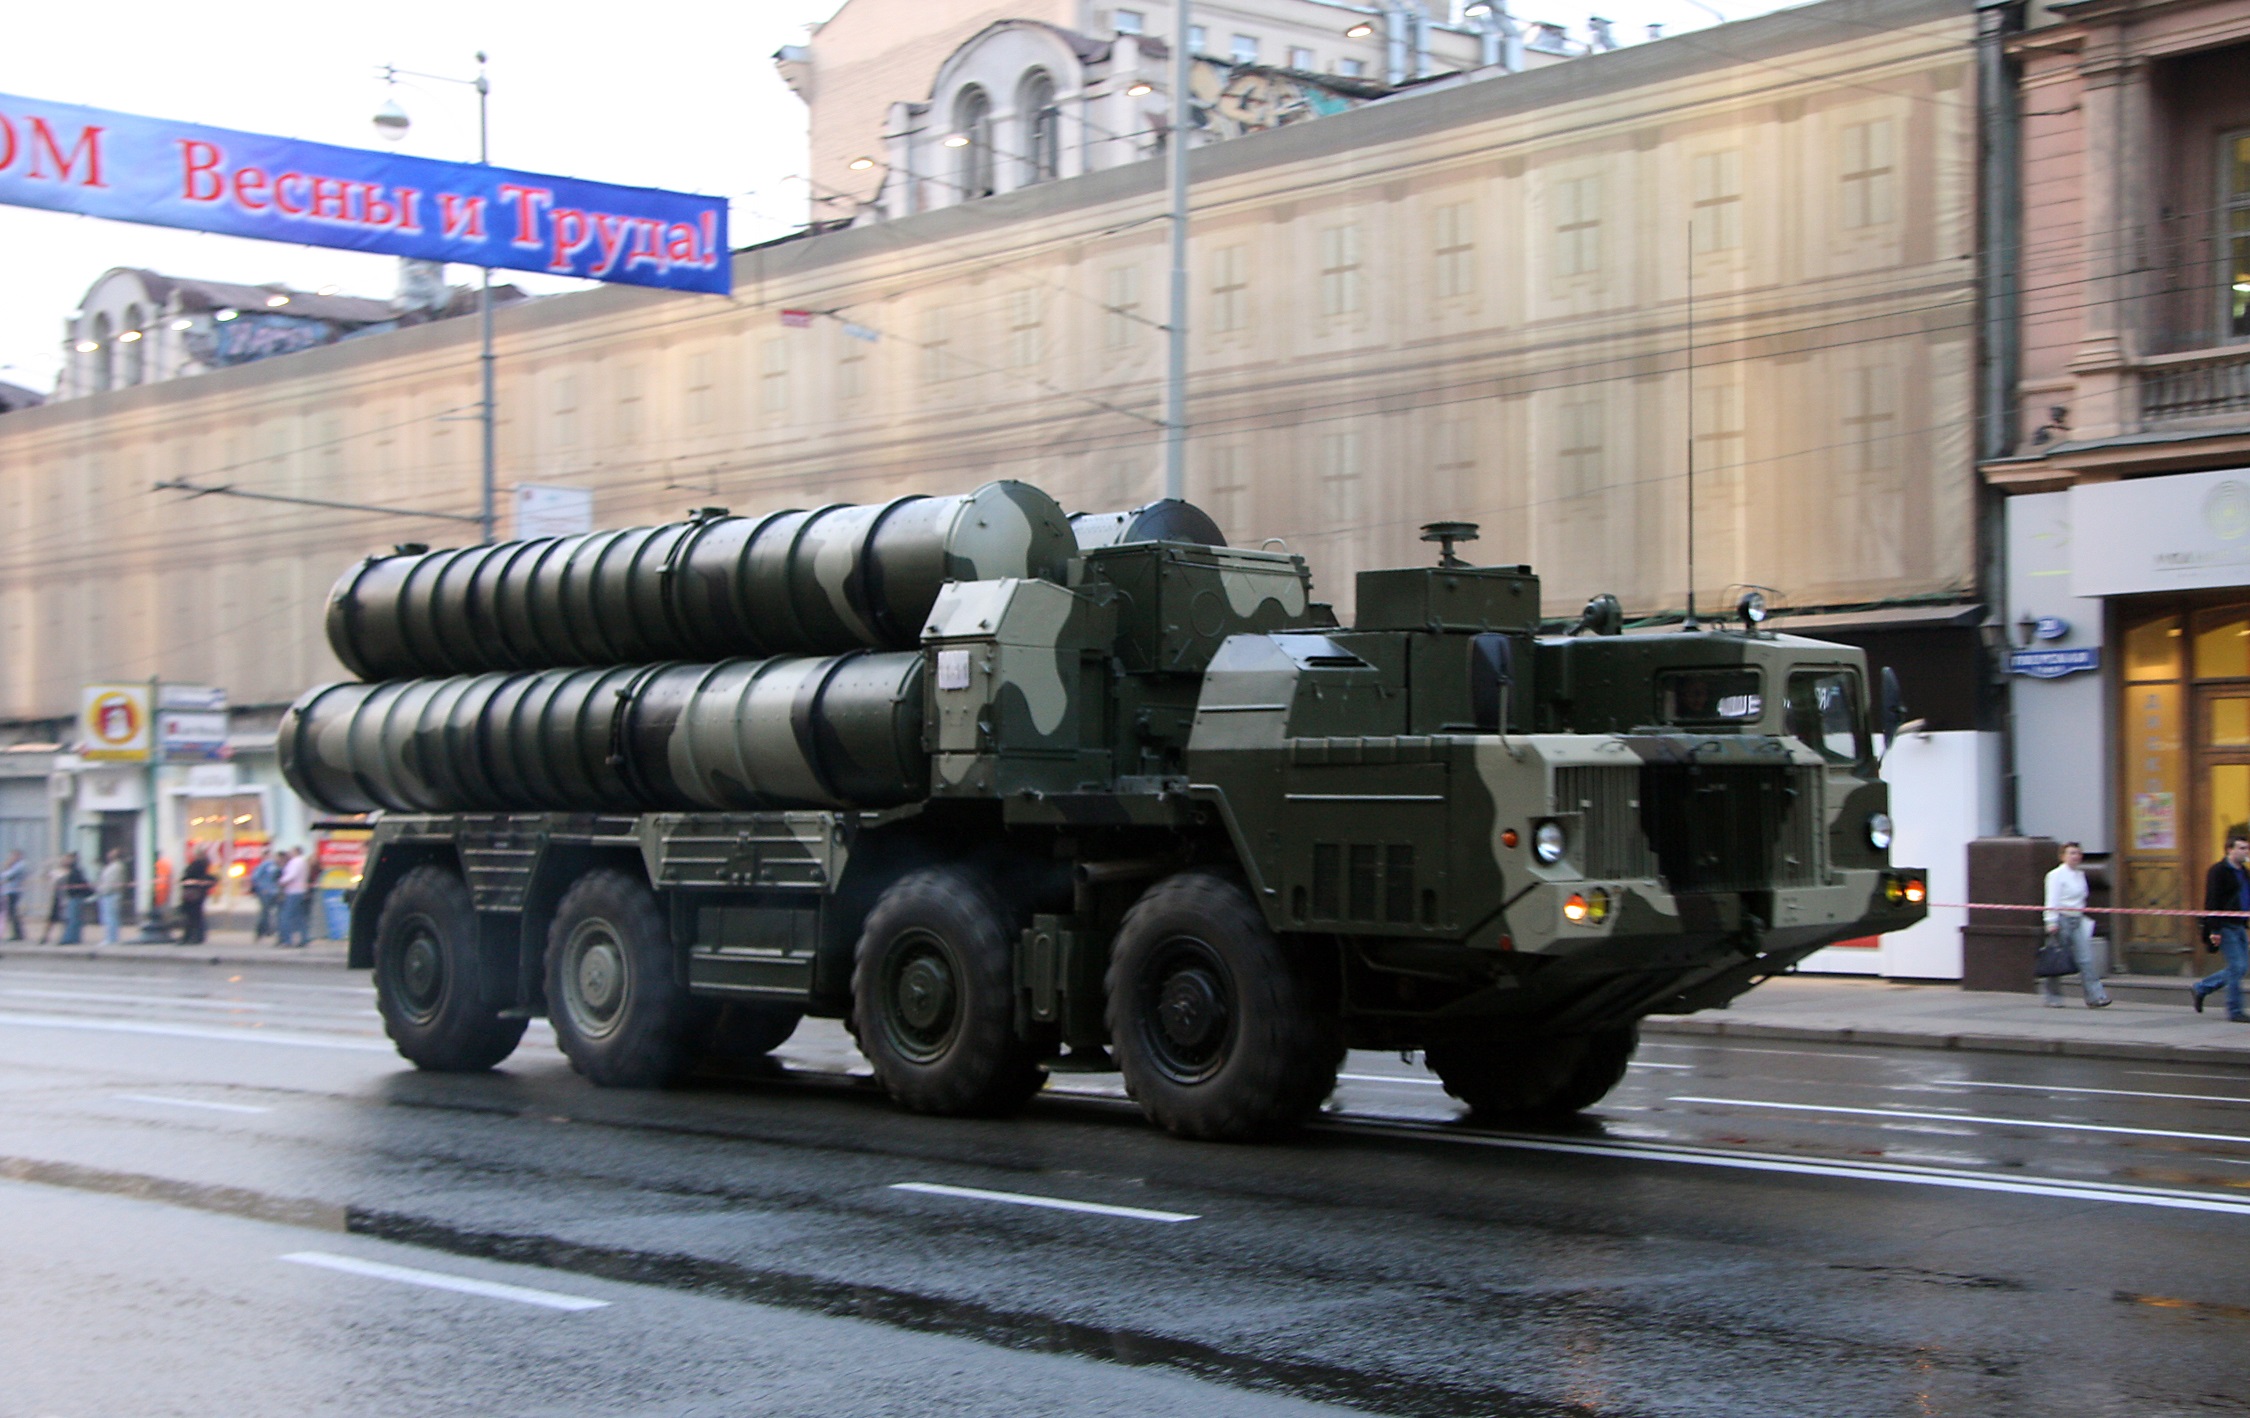 S-300_-_2009_Moscow_Victory_Day_Parade_(2)